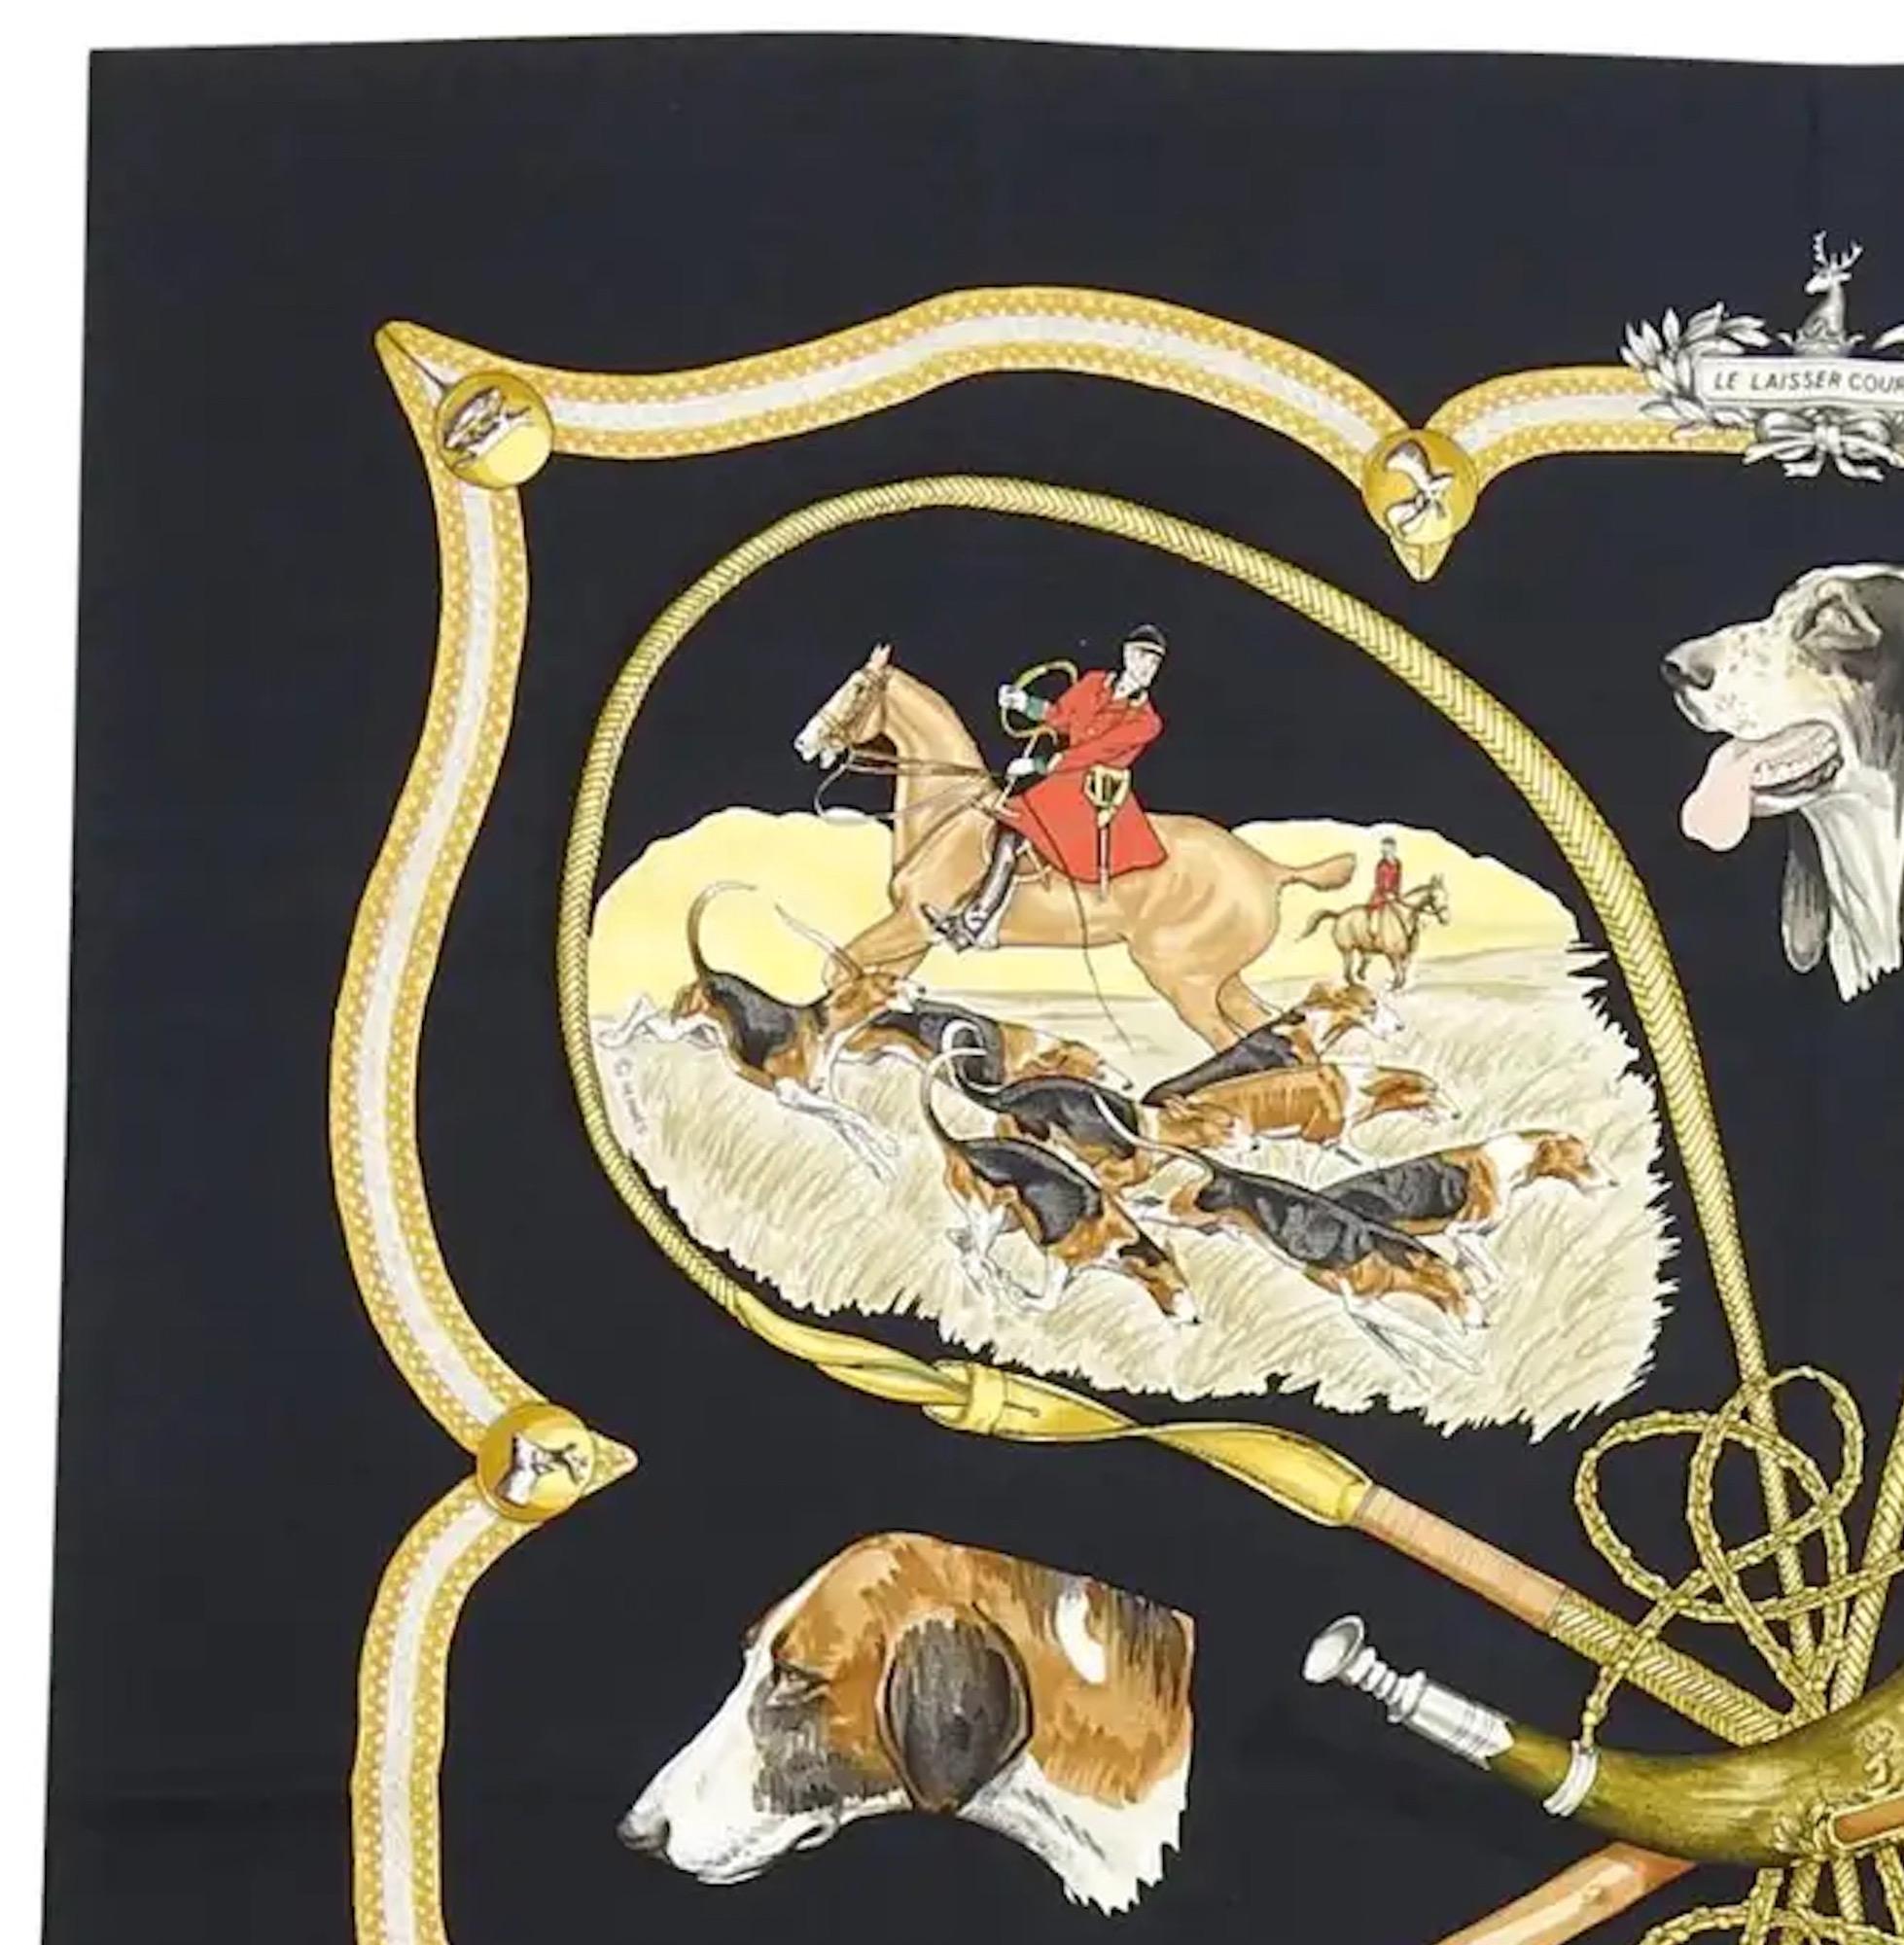 Hermes silk scarf « Le Laisser Courre » by J de Fougerolle featuring a black border, and a top logo signature. 
Circa 1979
In good vintage condition. Made in France.
35,4in. (90cm)  X 35,4in. (90cm)
We guarantee you will receive this  iconic item as